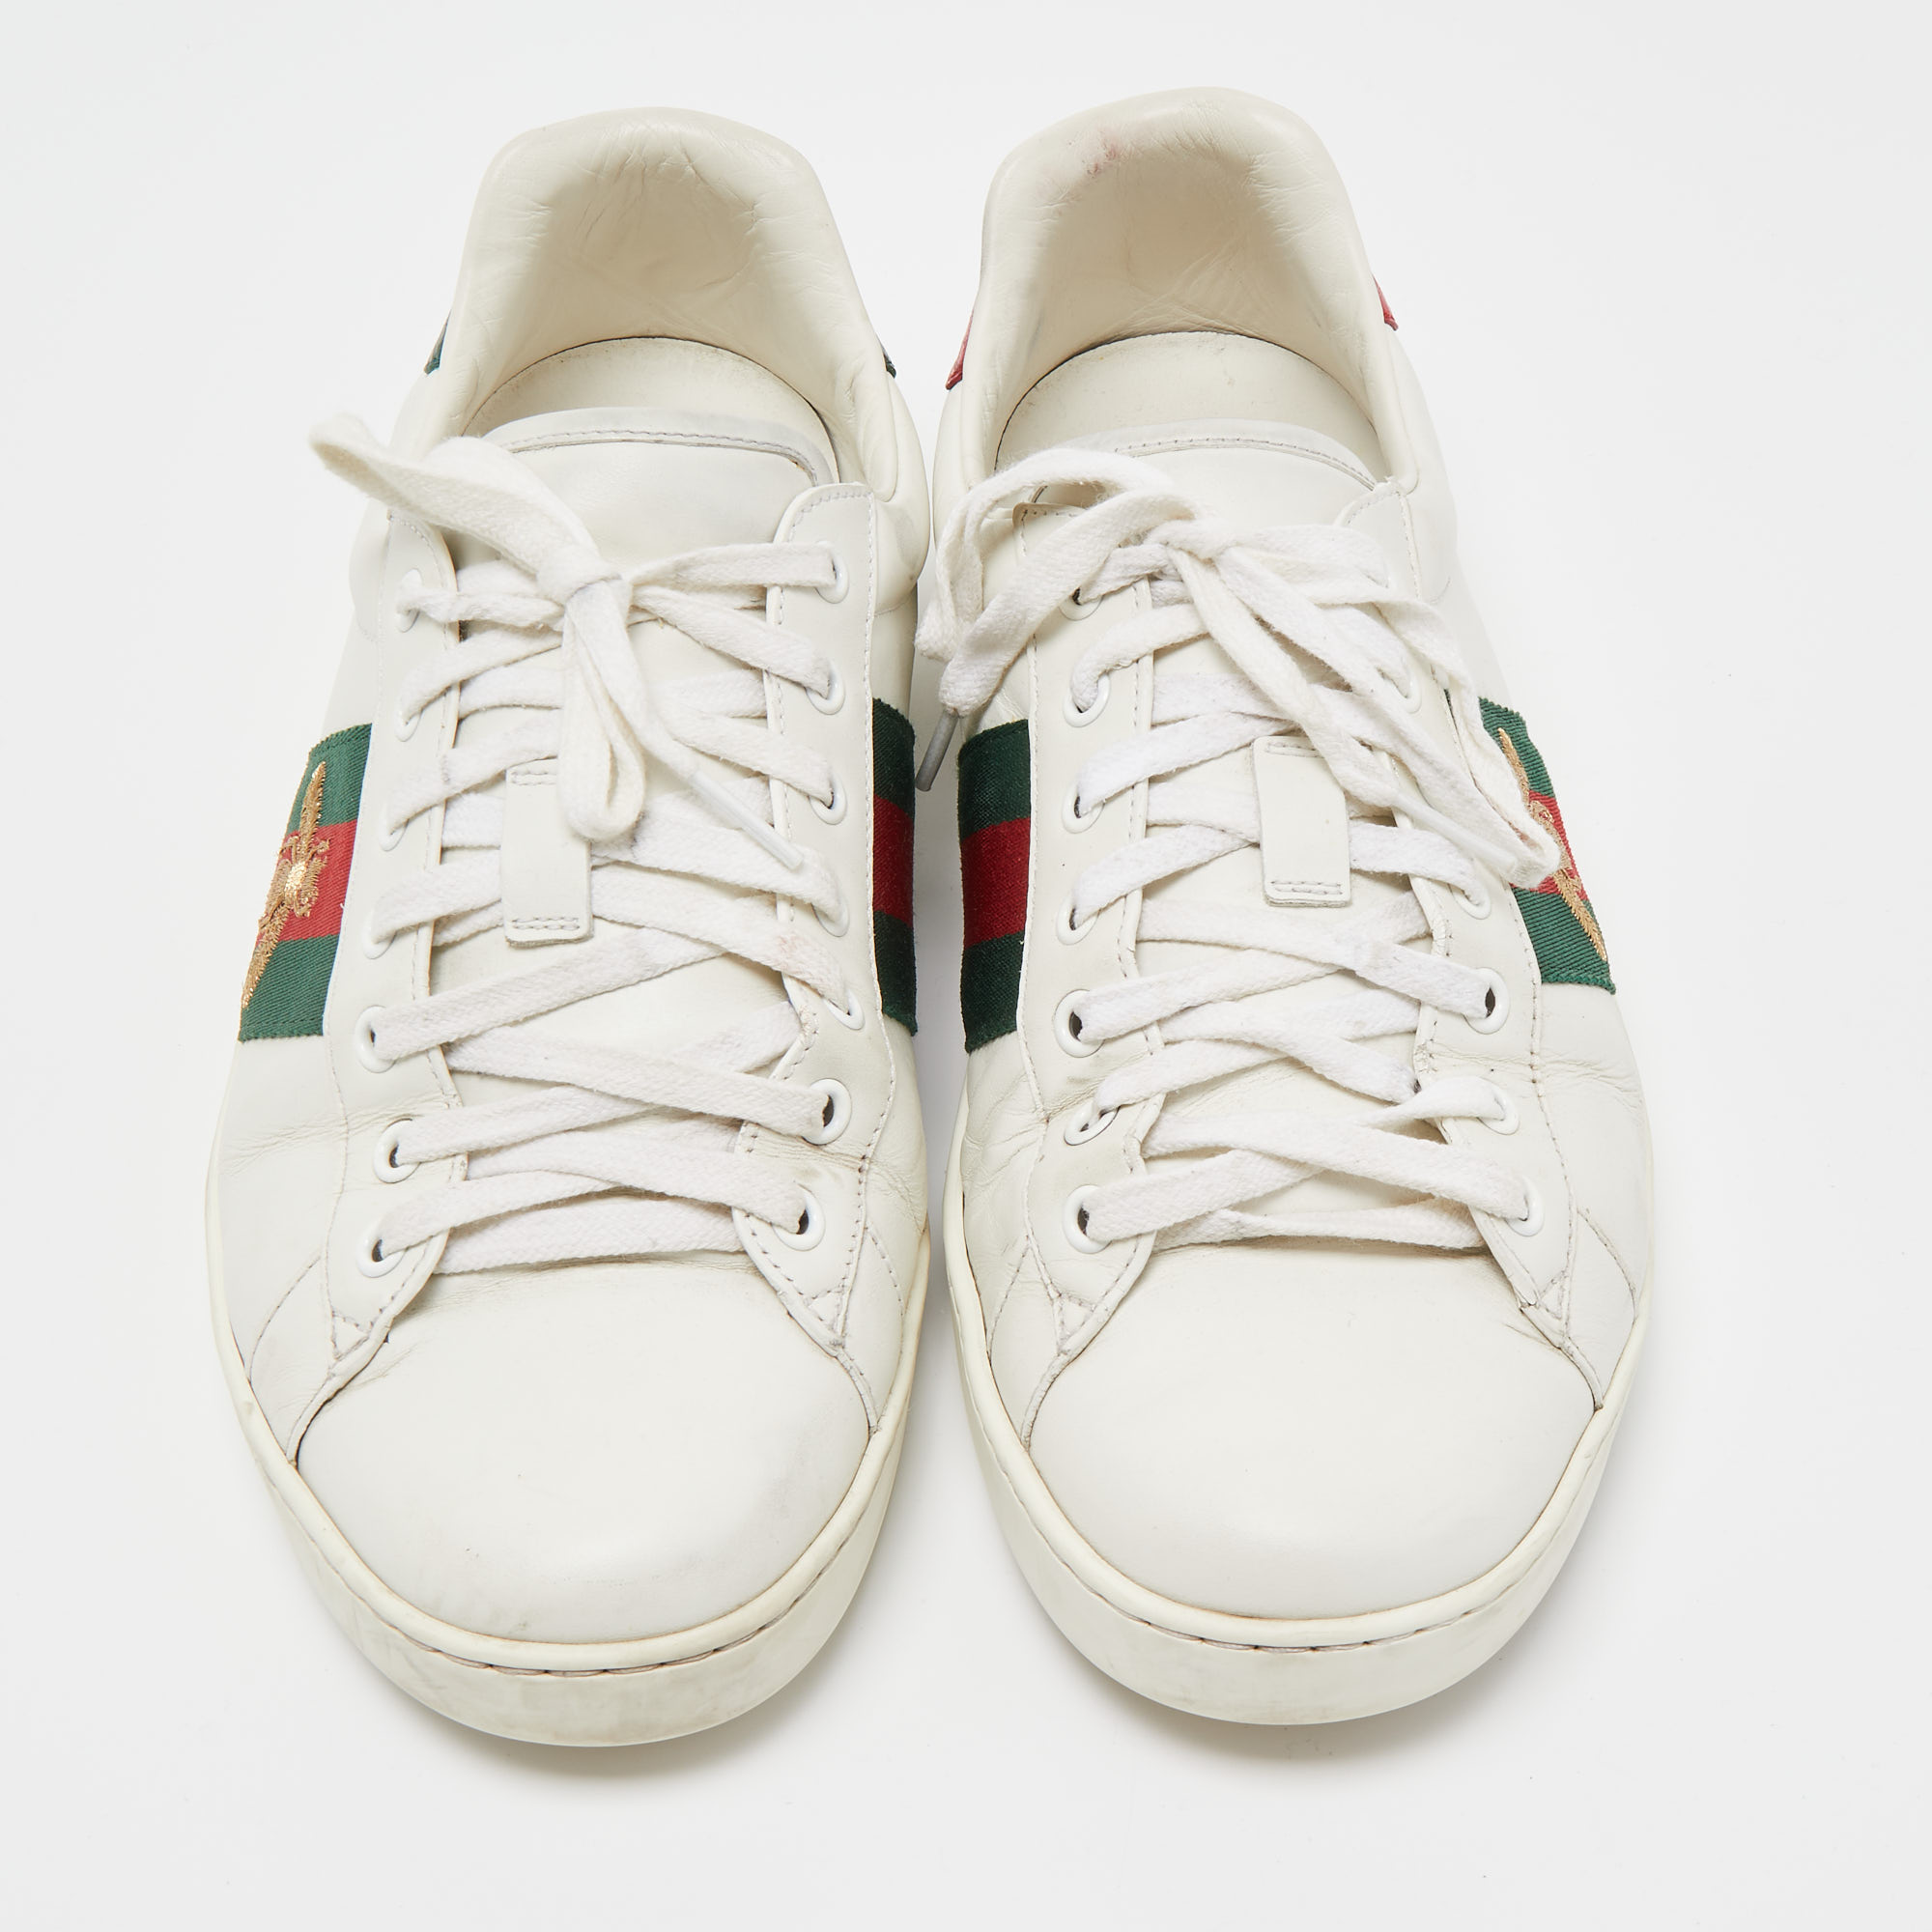 Gucci White Leather Embroidered Bee Ace Sneakers Size 43